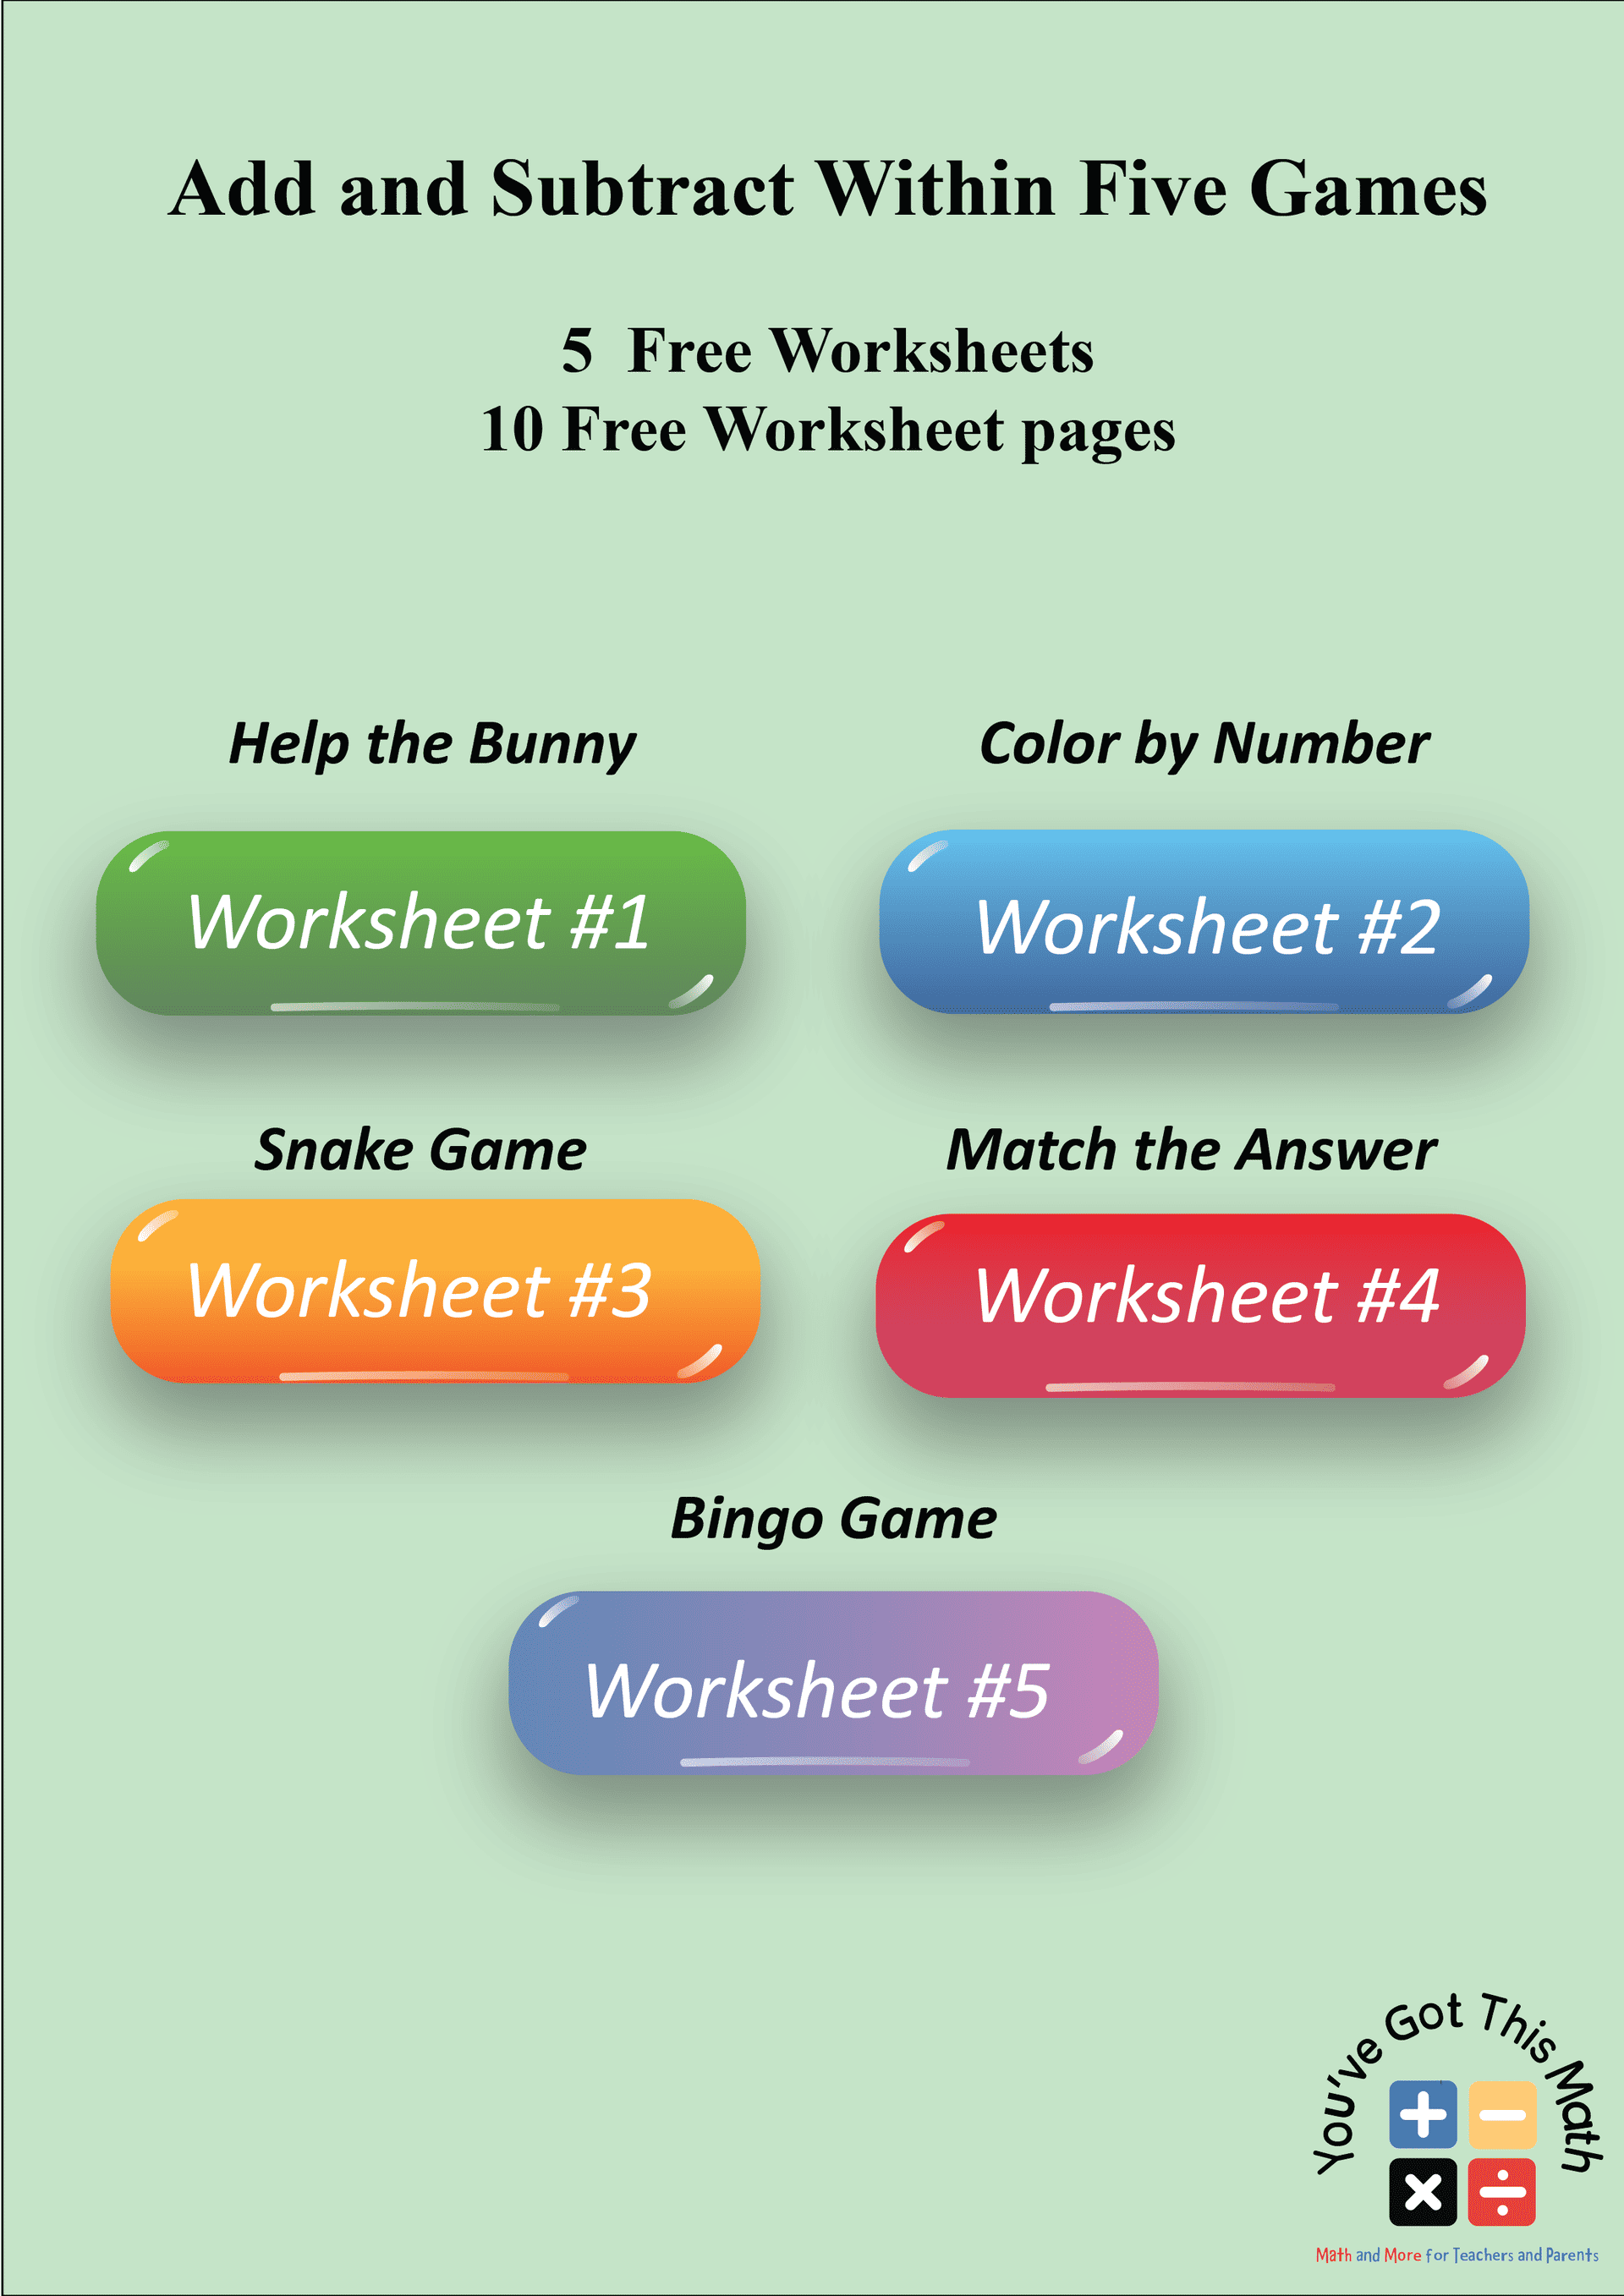 Add and Subtract Within Five Games | 5 Free Worksheets